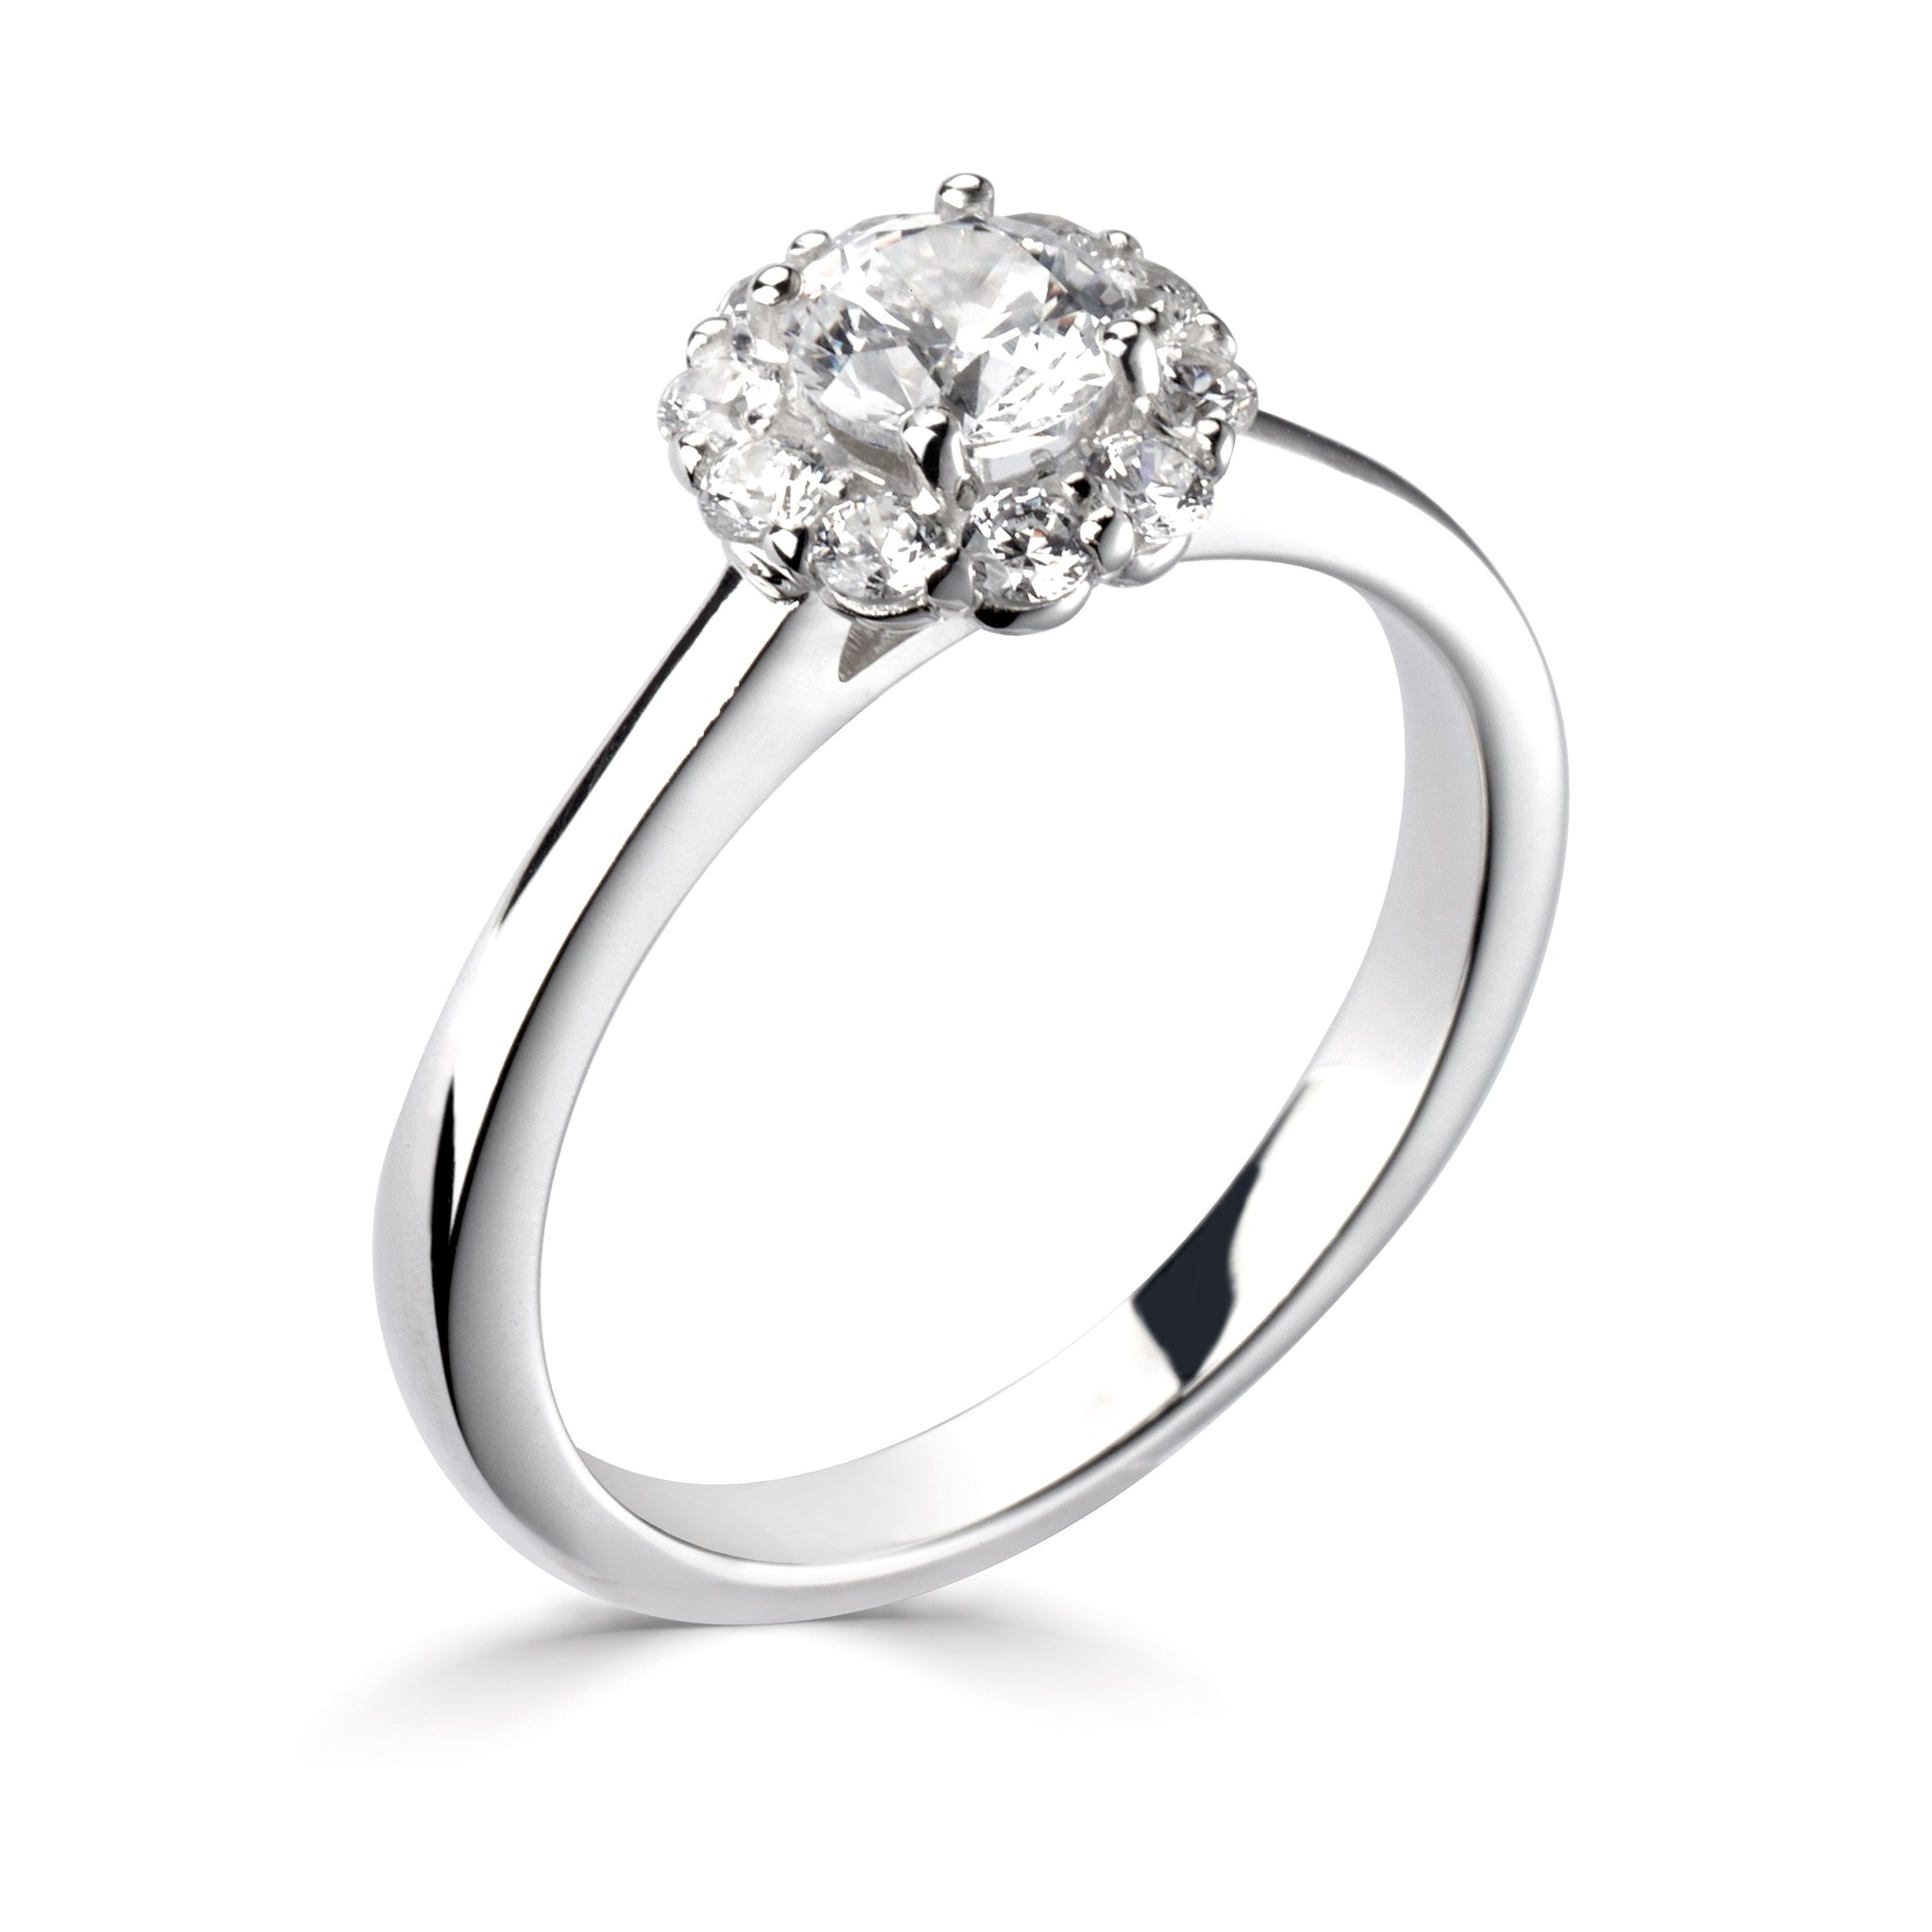 Alondra *Select a Round Diamond 0.33ct or above